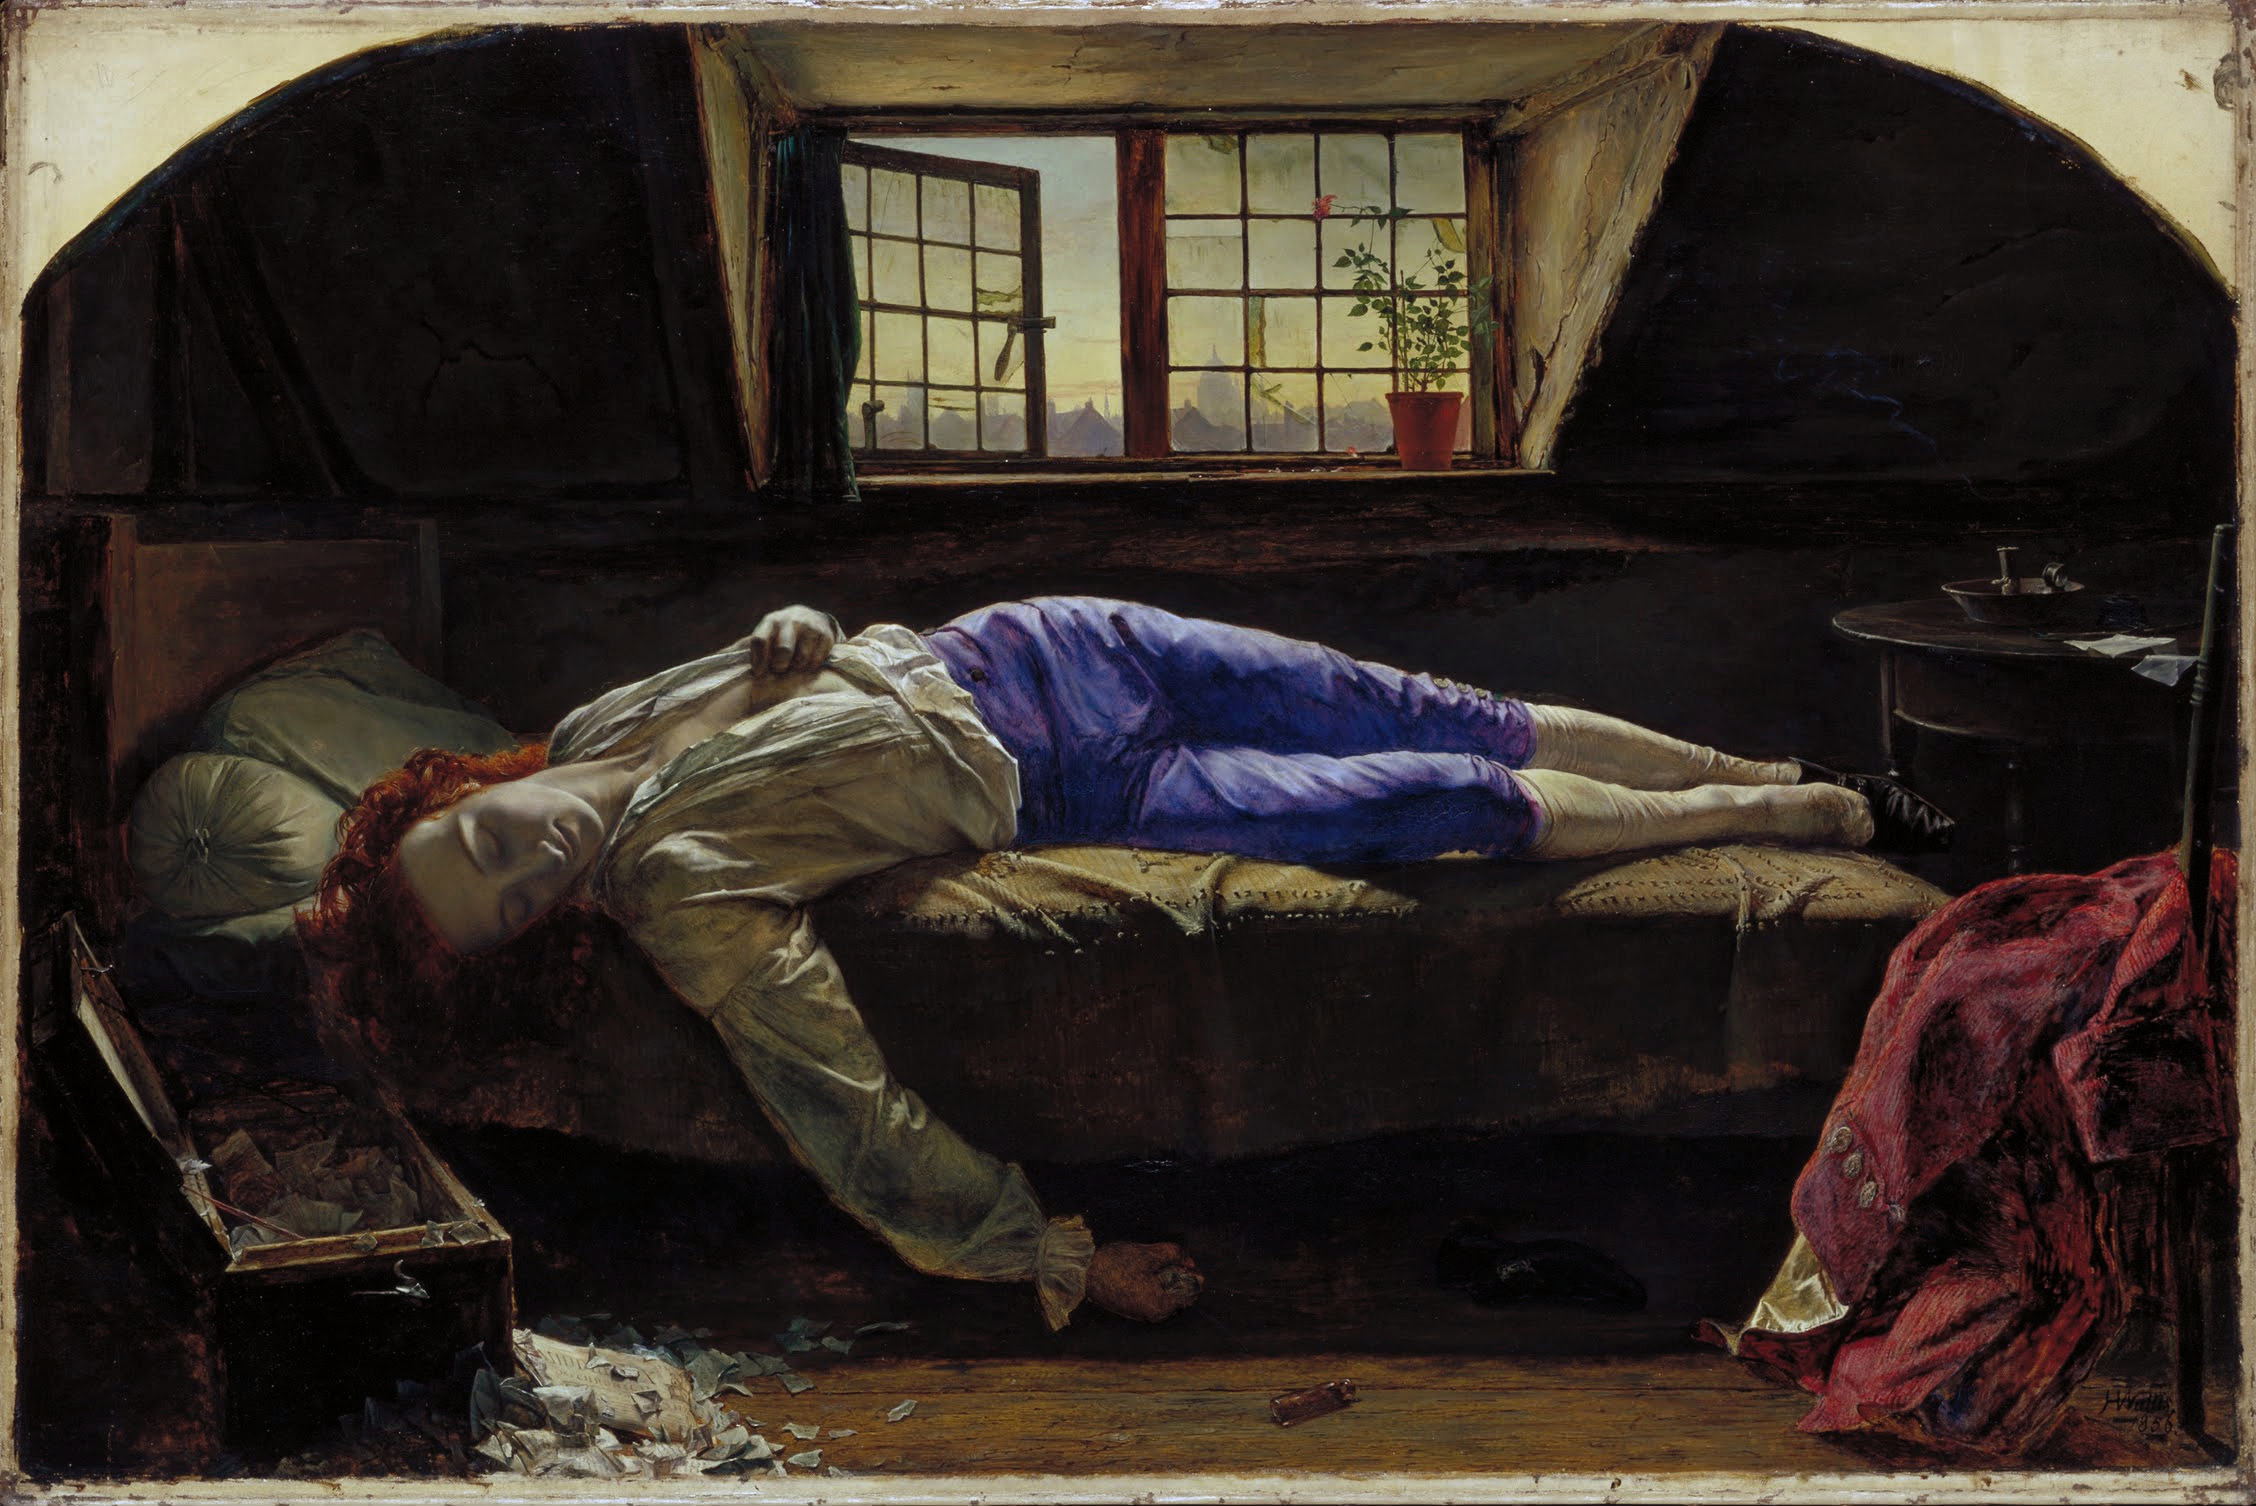 A young man in blue and white 18th-century clothing lies lifeless on a small bed in a dimly lit attic with scattered papers, a chest, a table, and a window showing a sunset.